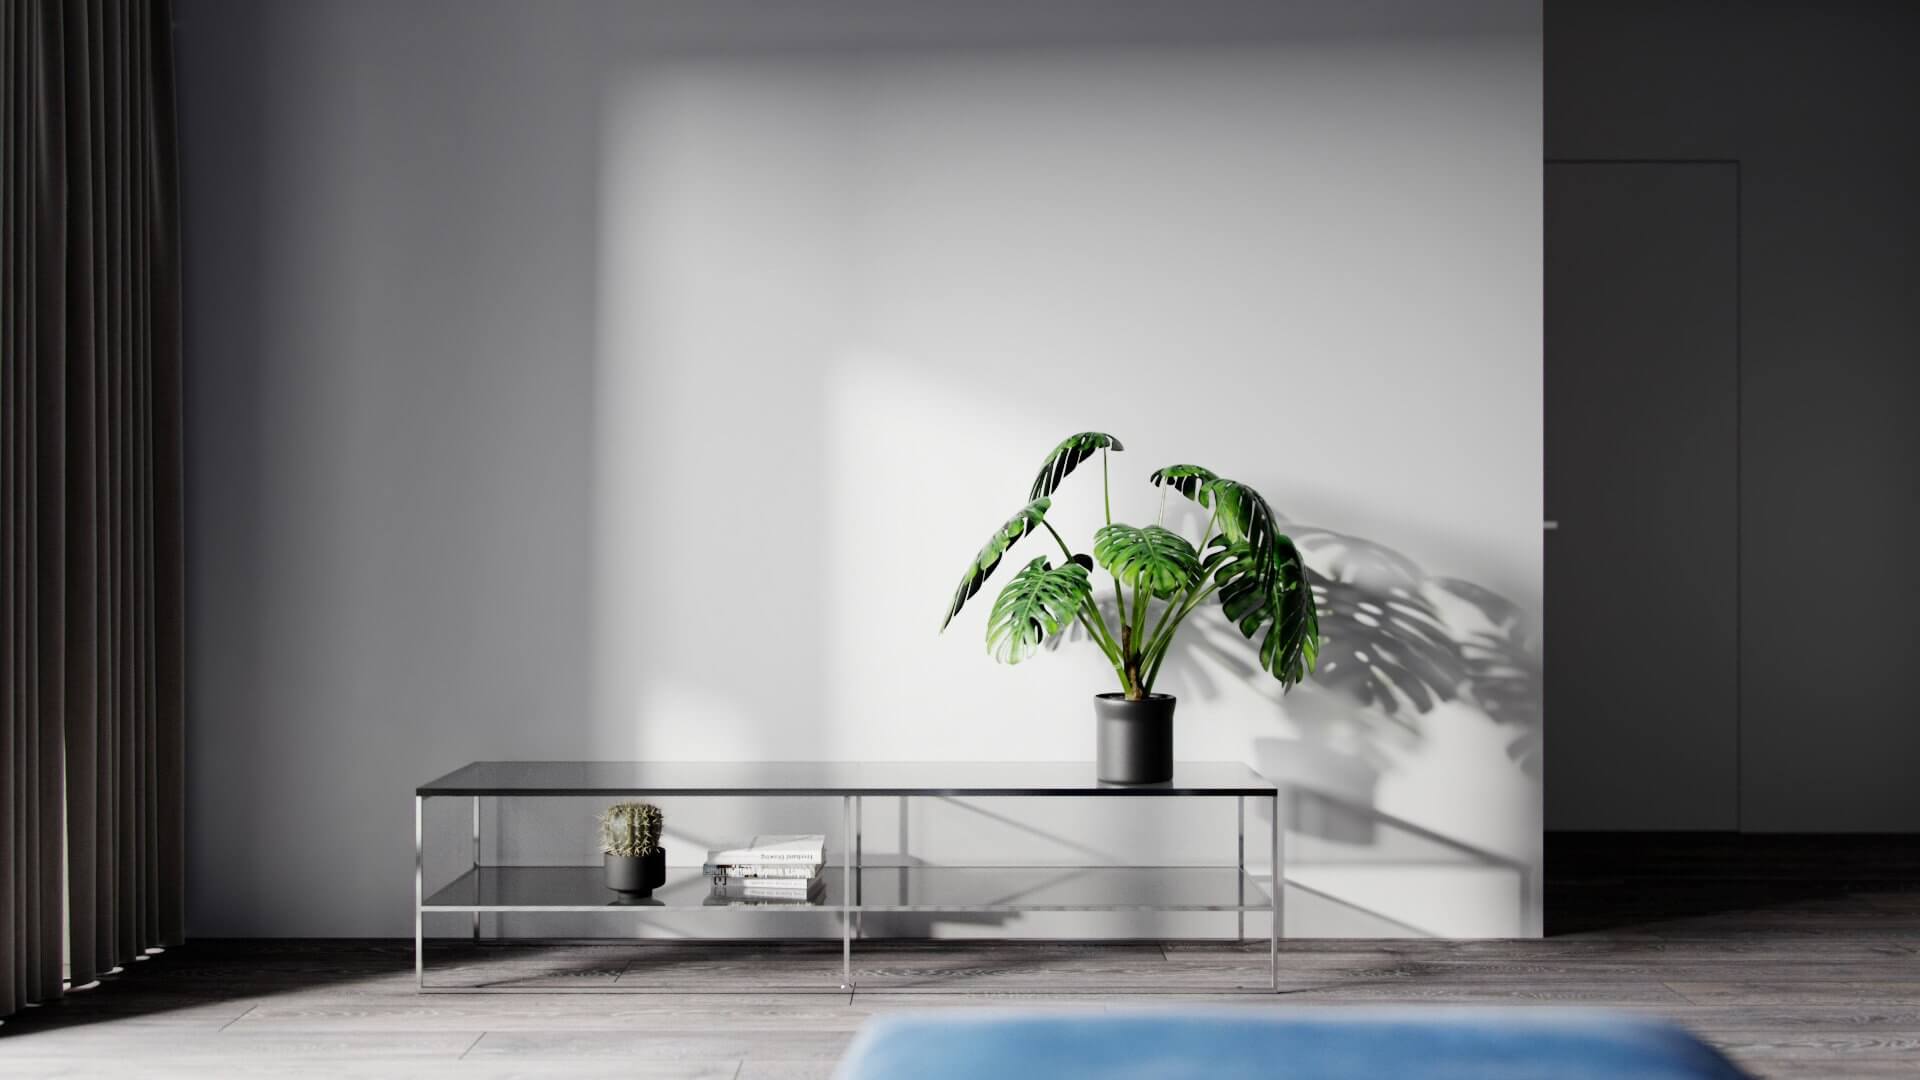 Classic and clean apartment living room sideboard glass plant - cgi visualization